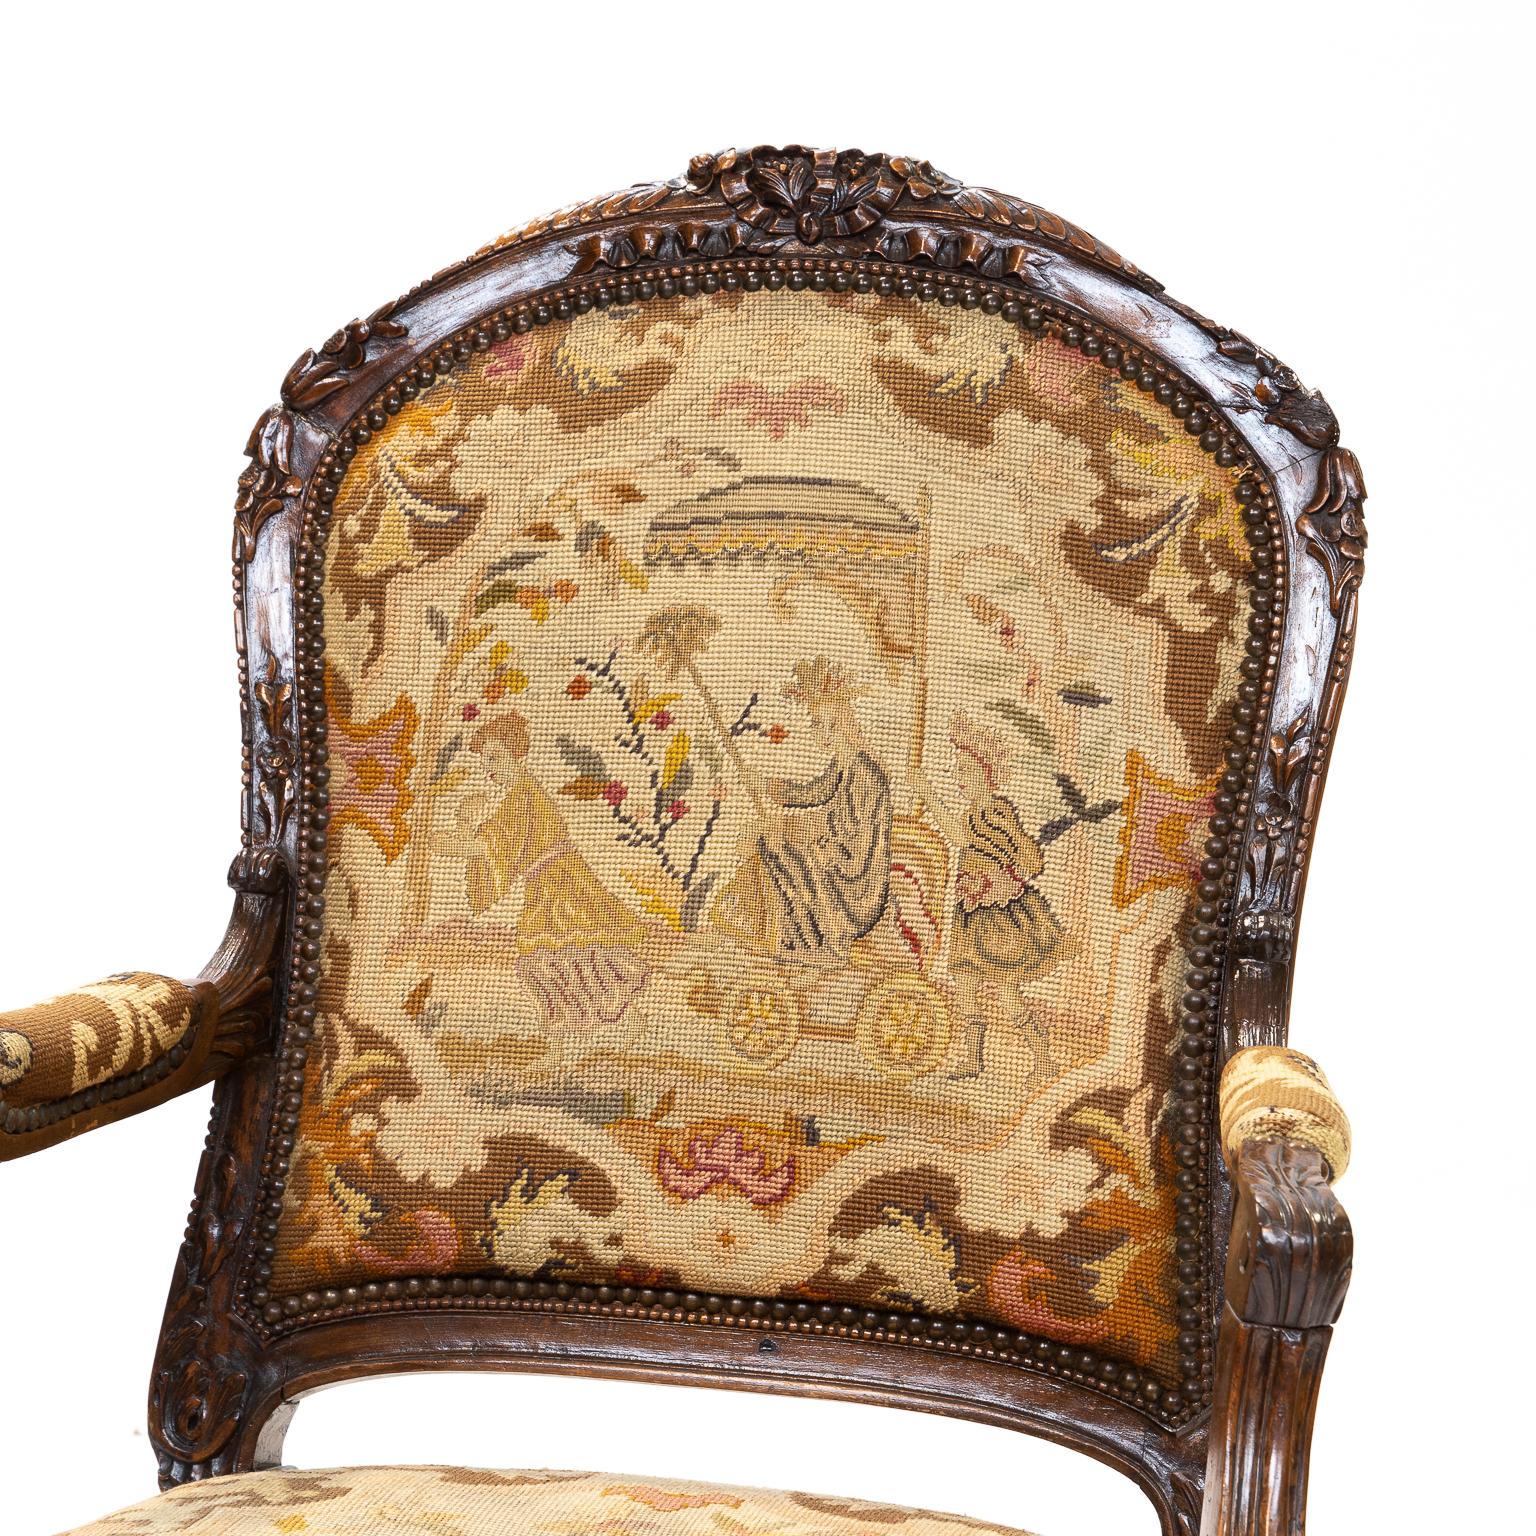 19th Century Louis XV walnut chaise à la reine, with needlepoint covering, well-carved chair frame having a beautiful patina. The chair construction is very sound and the tapestry is in very good condition. There is fraying to the back of the chair